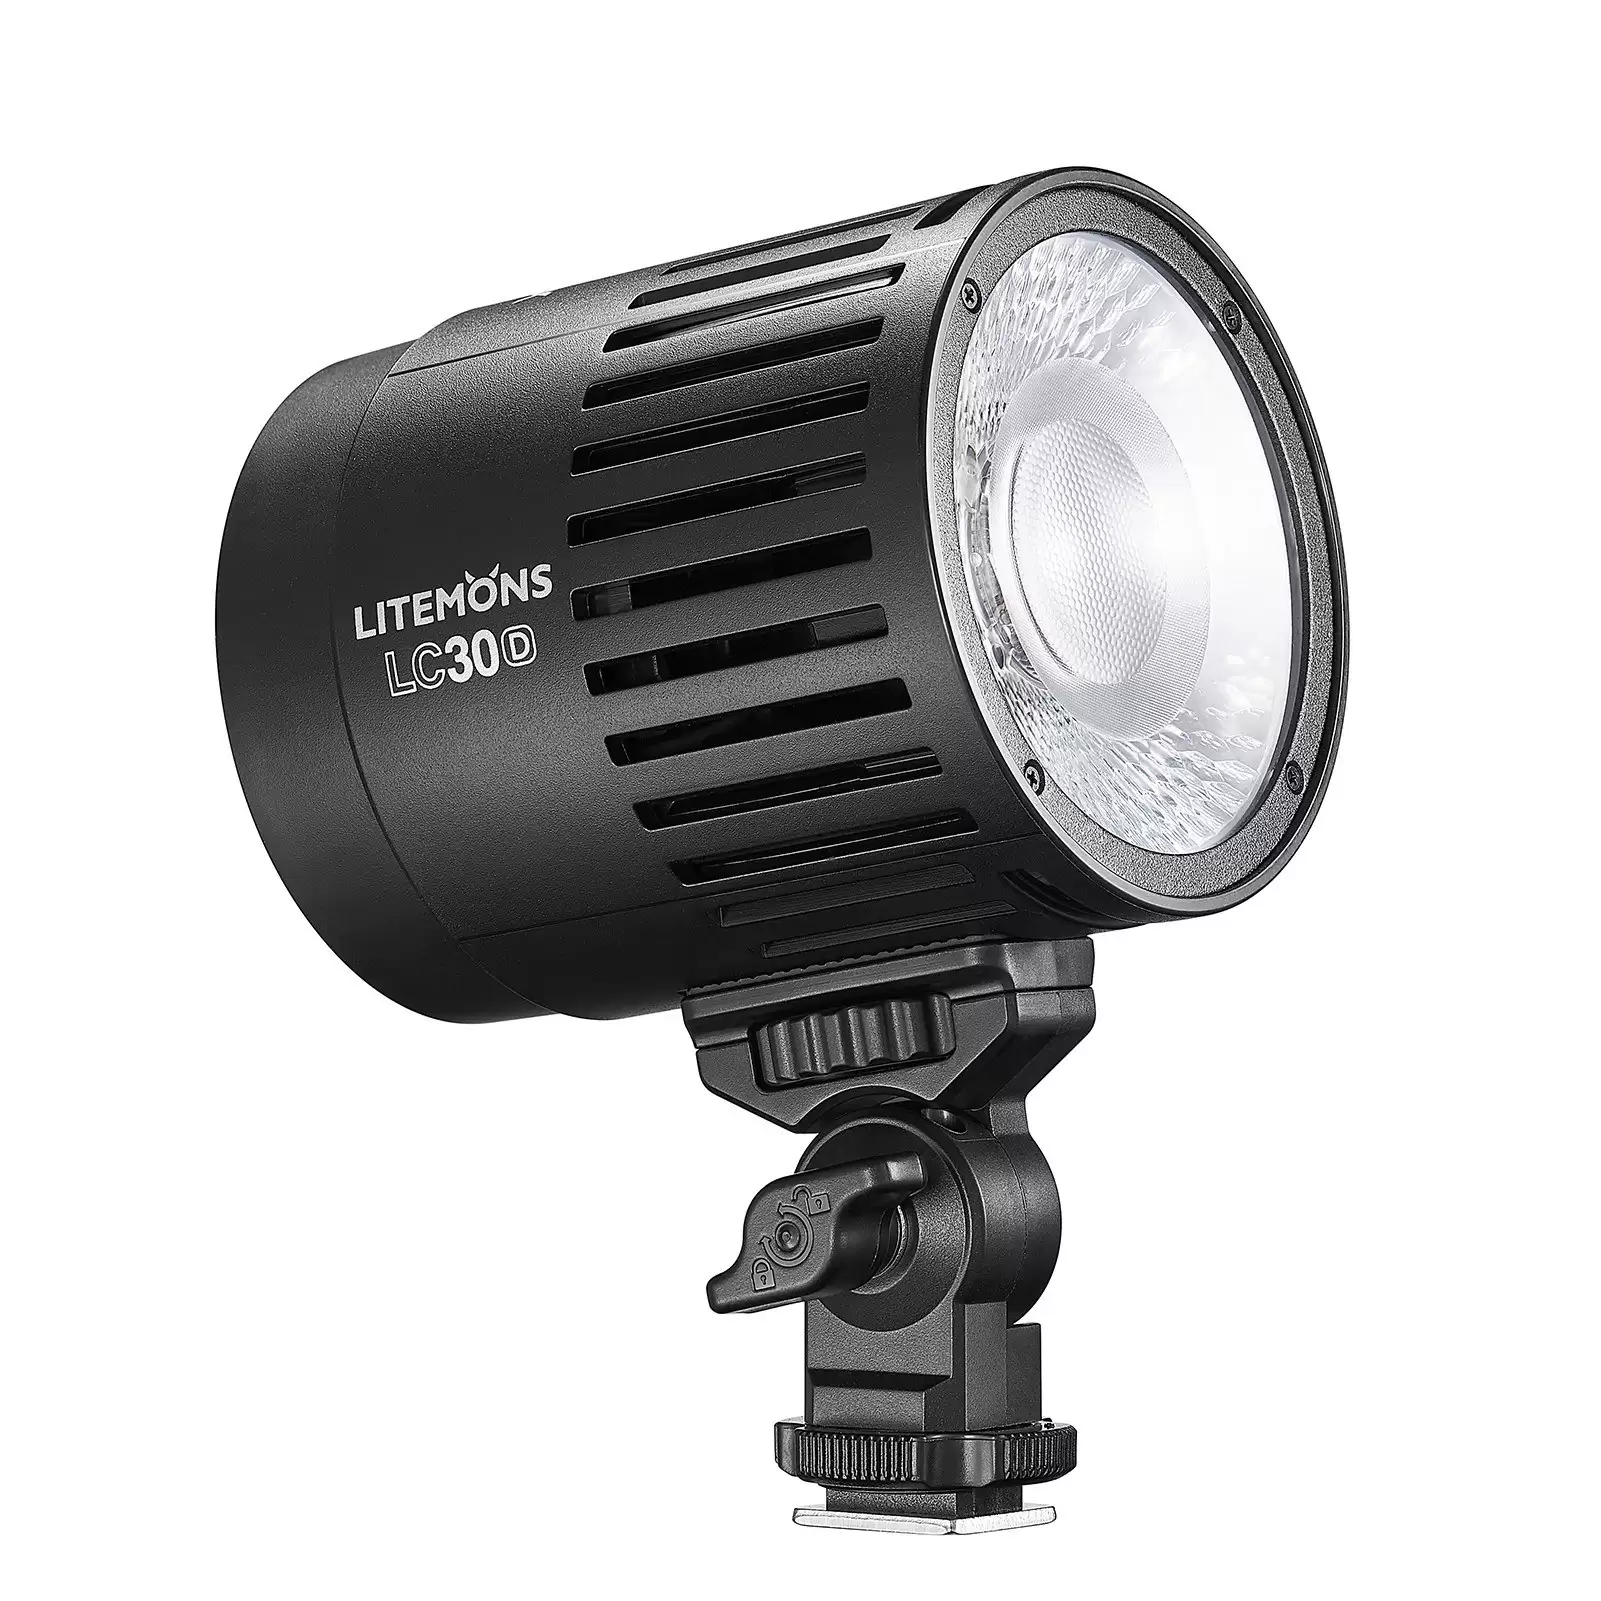 Order In Just $71.99 Godox Lc30d 33w Litemons Tabletop Led Video Light Using This Tomtop Discount Code